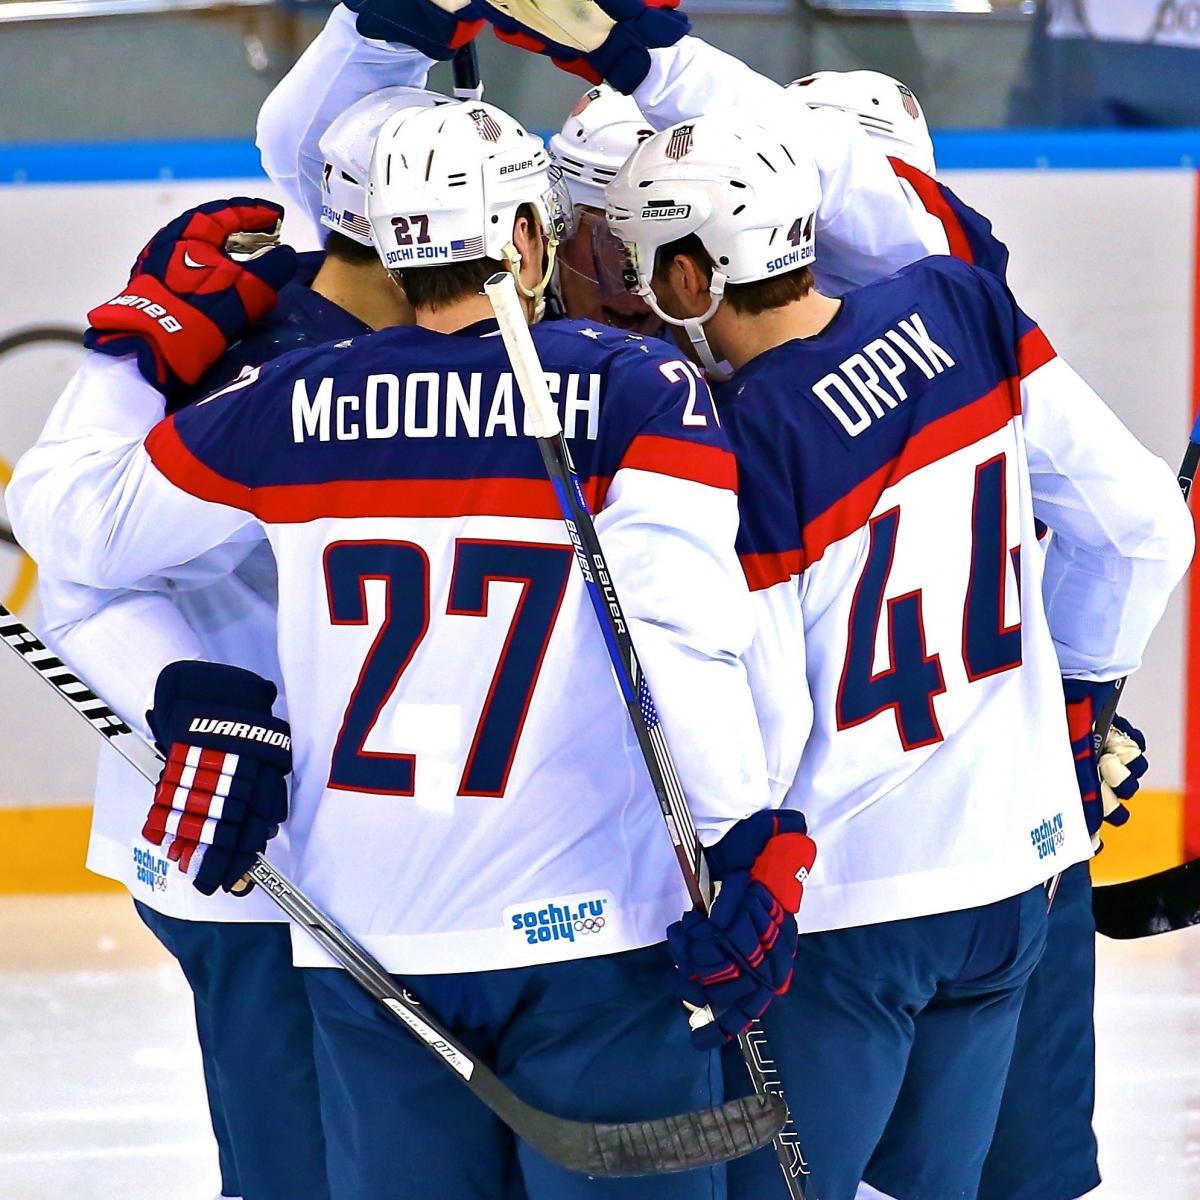 Olympic Men's Hockey Is Team USA the Favorite After Dominant Win